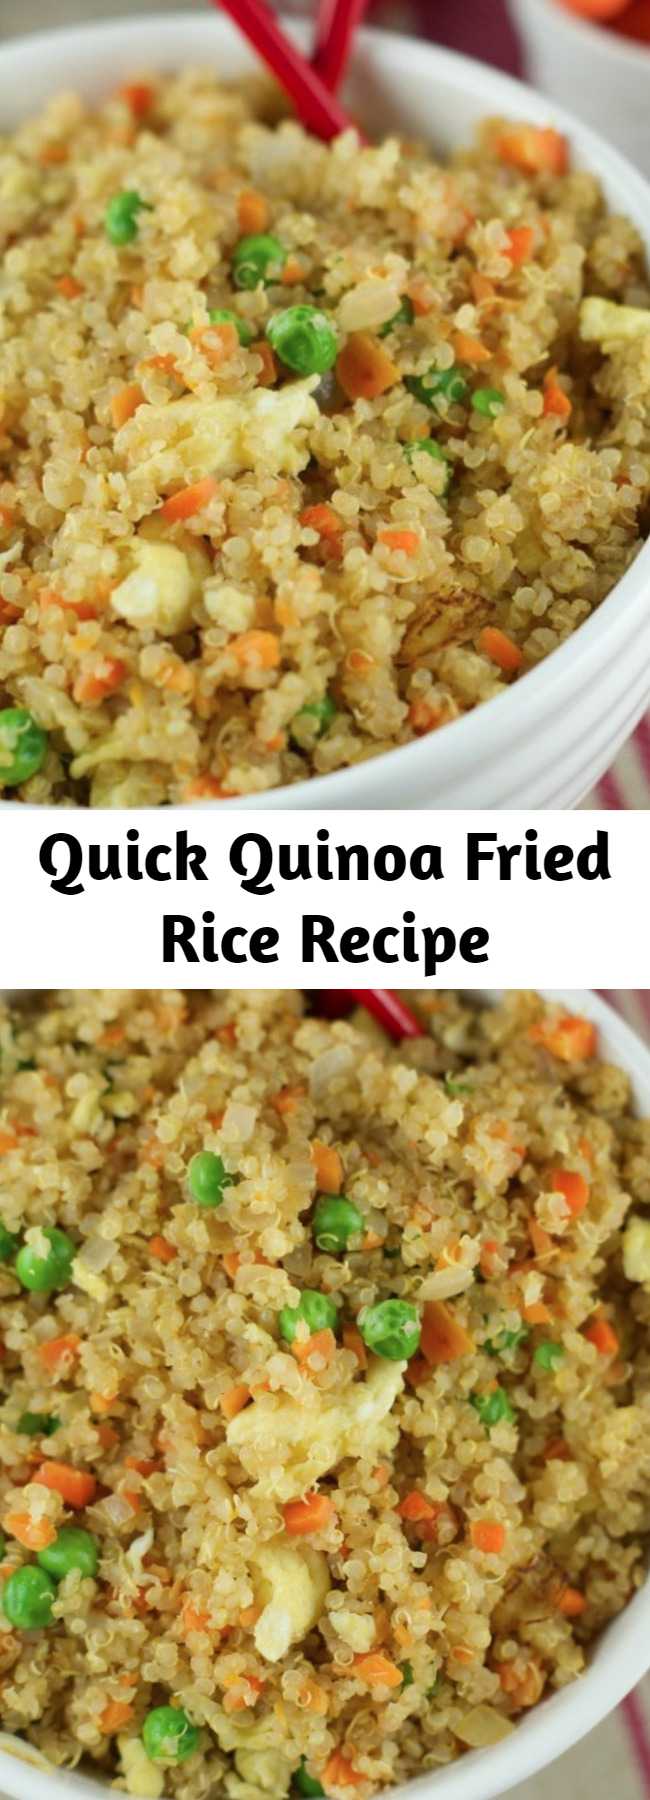 Quick Quinoa Fried Rice Recipe - This Quinoa Fried Recipe requires only 10 minutes to make and it’s so delicious. Fresh veggies and quinoa make a healthy and satisfying combination. Try it!